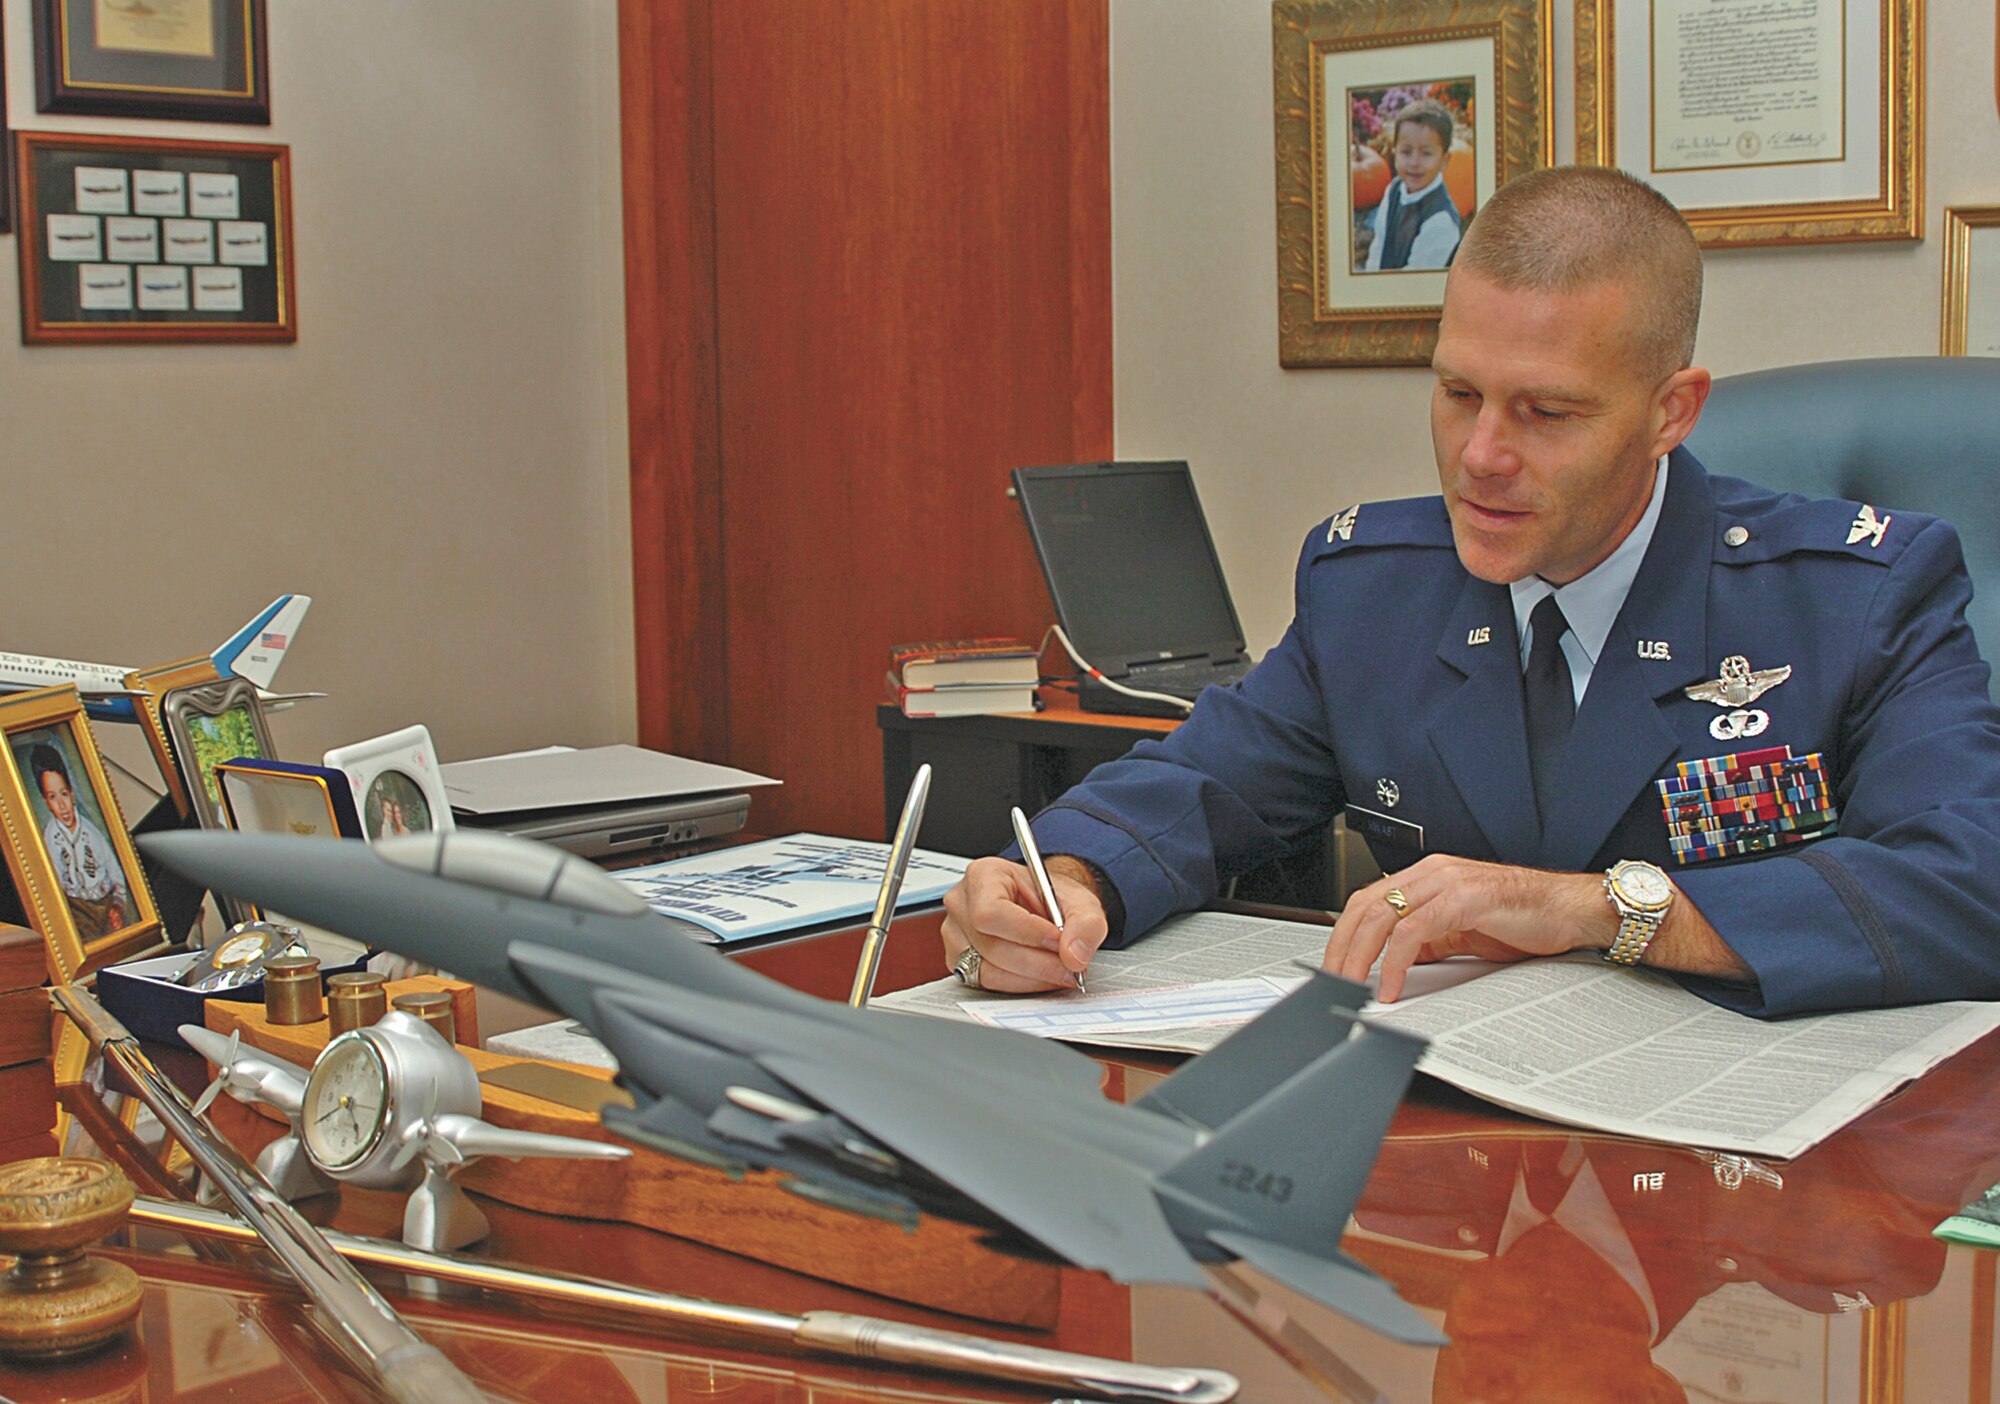 Colonel Steve Kwast, 4th Fighter Wing commander, signs the pledge card for his Combined Federal Campaign donation Oct. 13 in the 4th Fighter Wing headquarters building. The charity campaign kicked off Oct. 11 and will run until Dec. 8. The annual CFC is an opportunity for military members and federal employees to donate to approximately 1,800 charitable organizations. For more information, contact your agency's CFC representative, call 722-5272 or visit https://intranet/cfc. (U.S. Air Force photo by Airman 1st Class Greg Biondo)